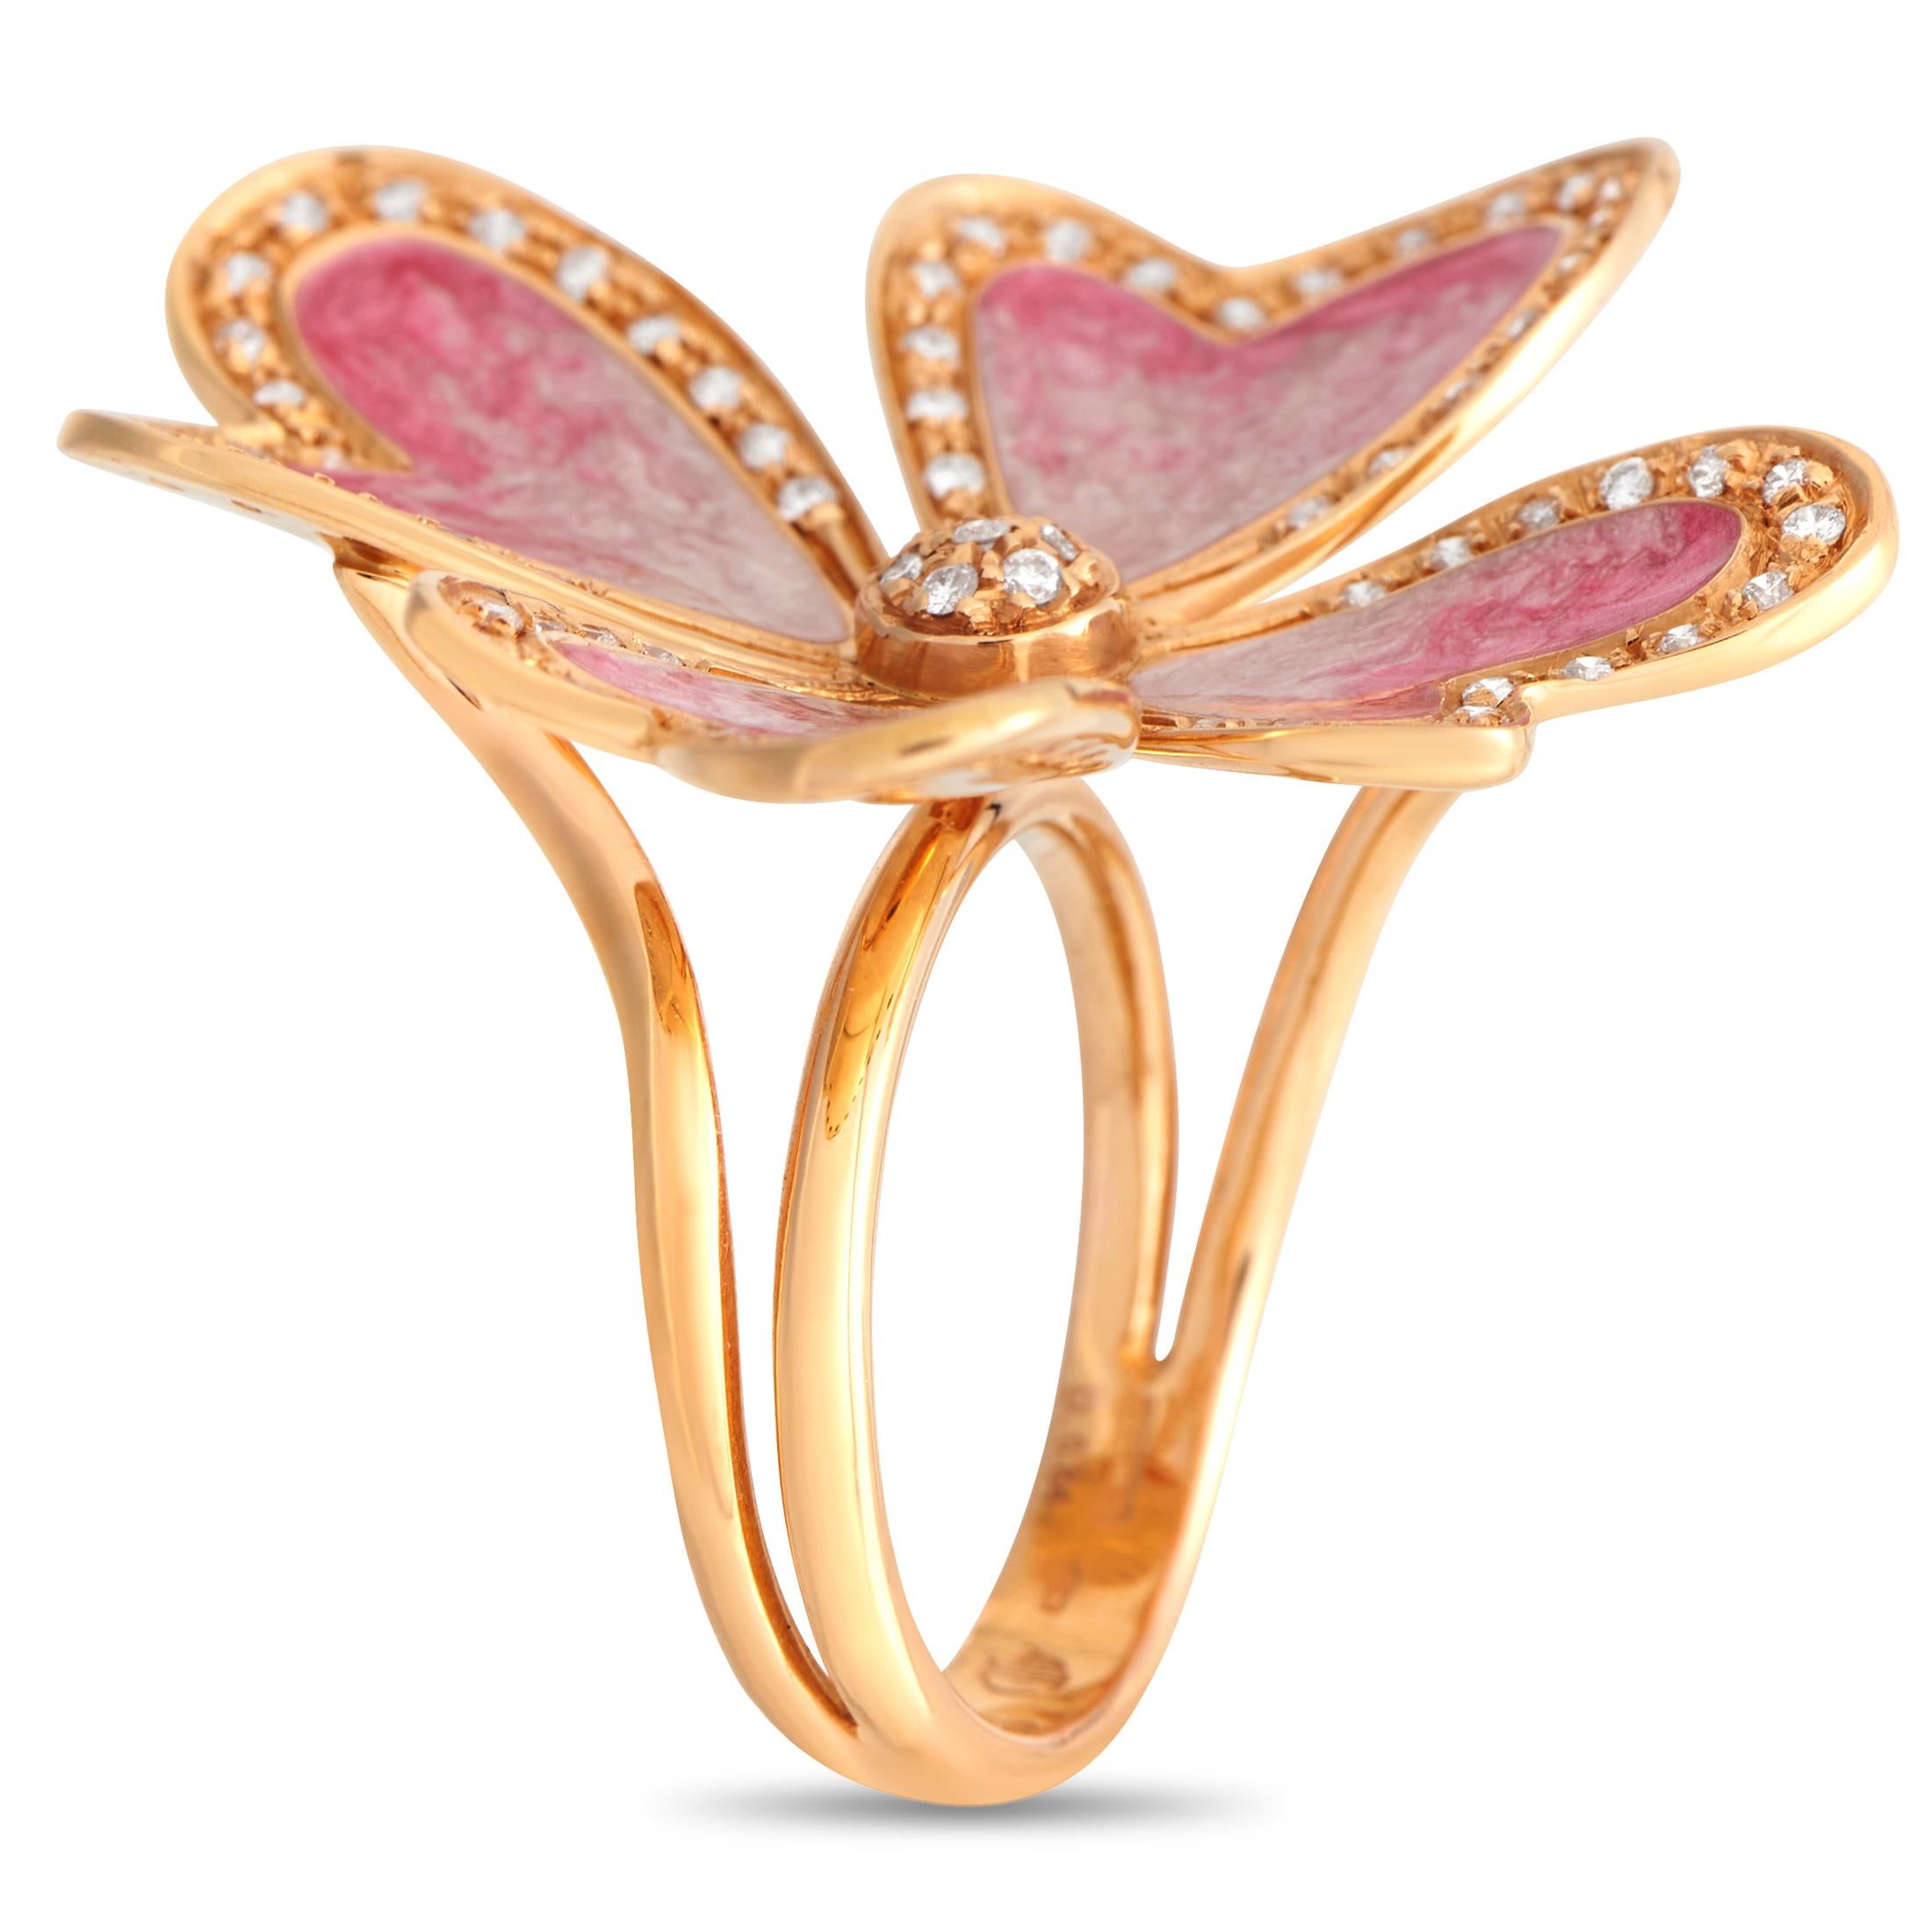 Inspired by the beauty of nature, this enameled jewel captivates with its charming aura and graceful demeanor. The ring features a unique split band that supports a four-petal blossom boasting enameled heart-shaped petals with diamond embellishment